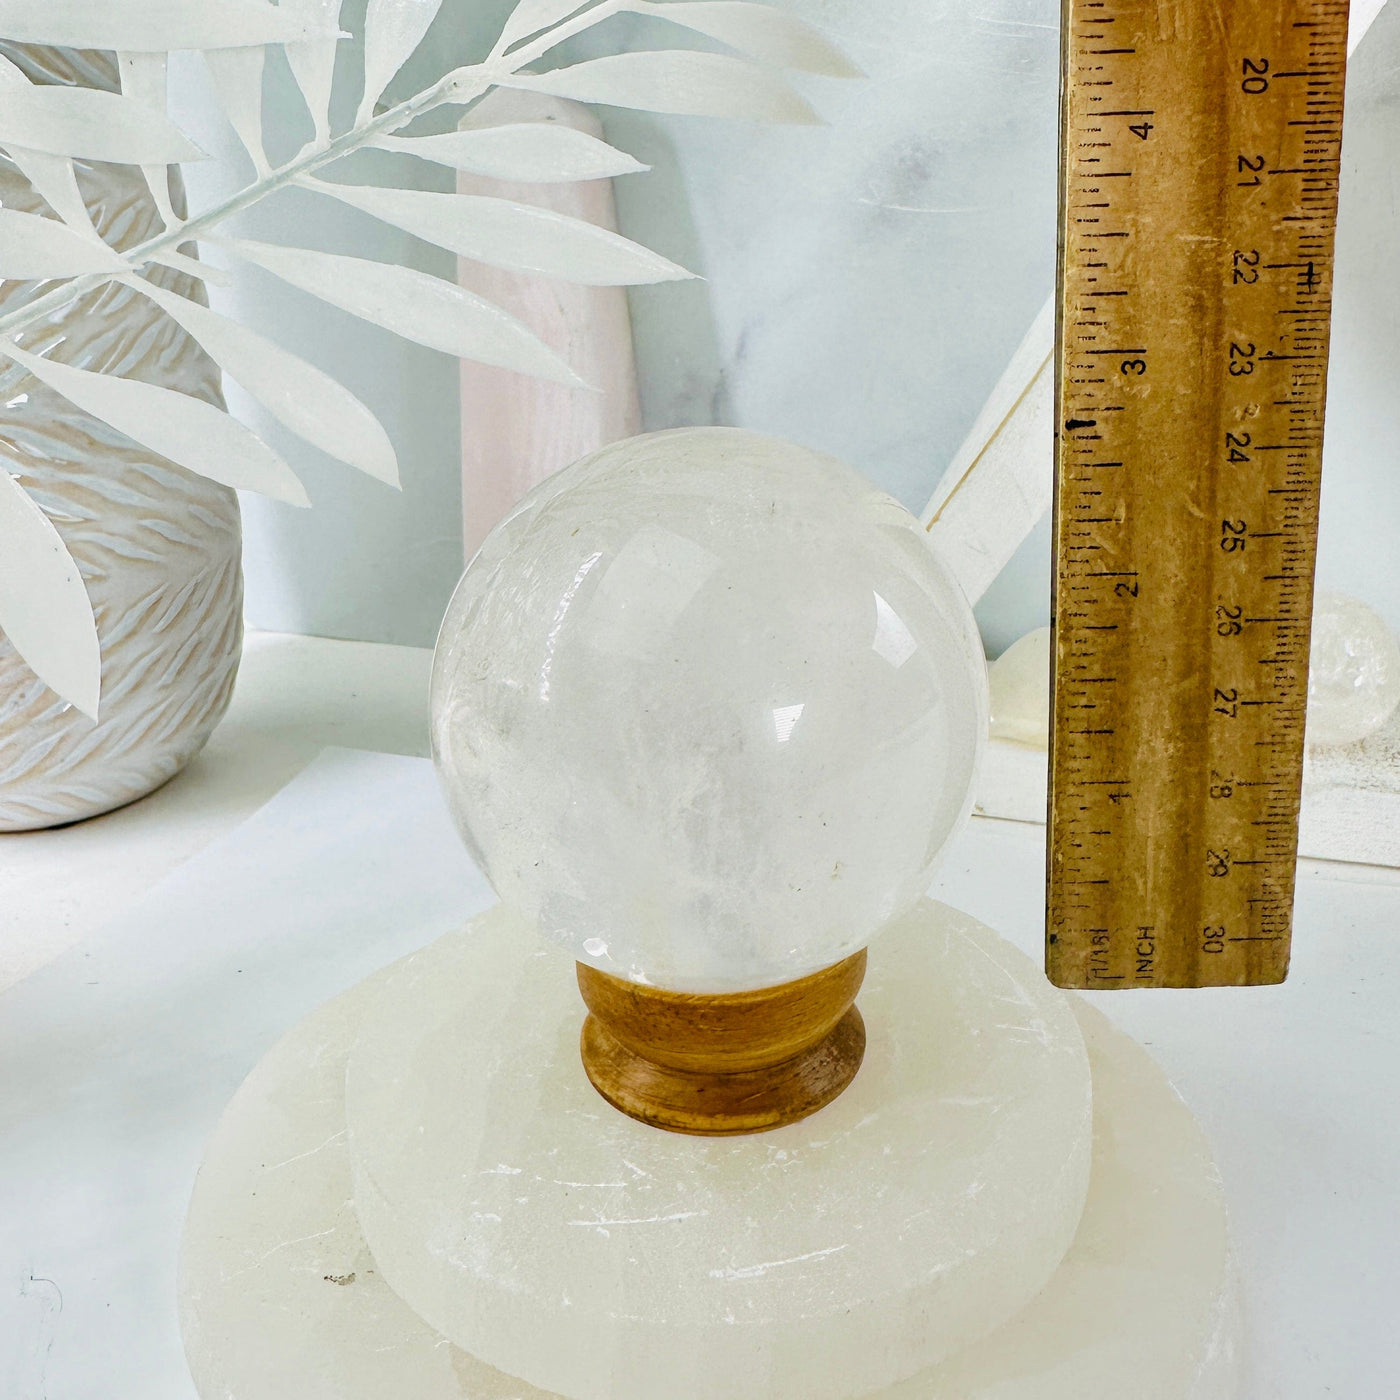 Crystal Quartz Sphere - OOAK - on stand next to ruler for size reference